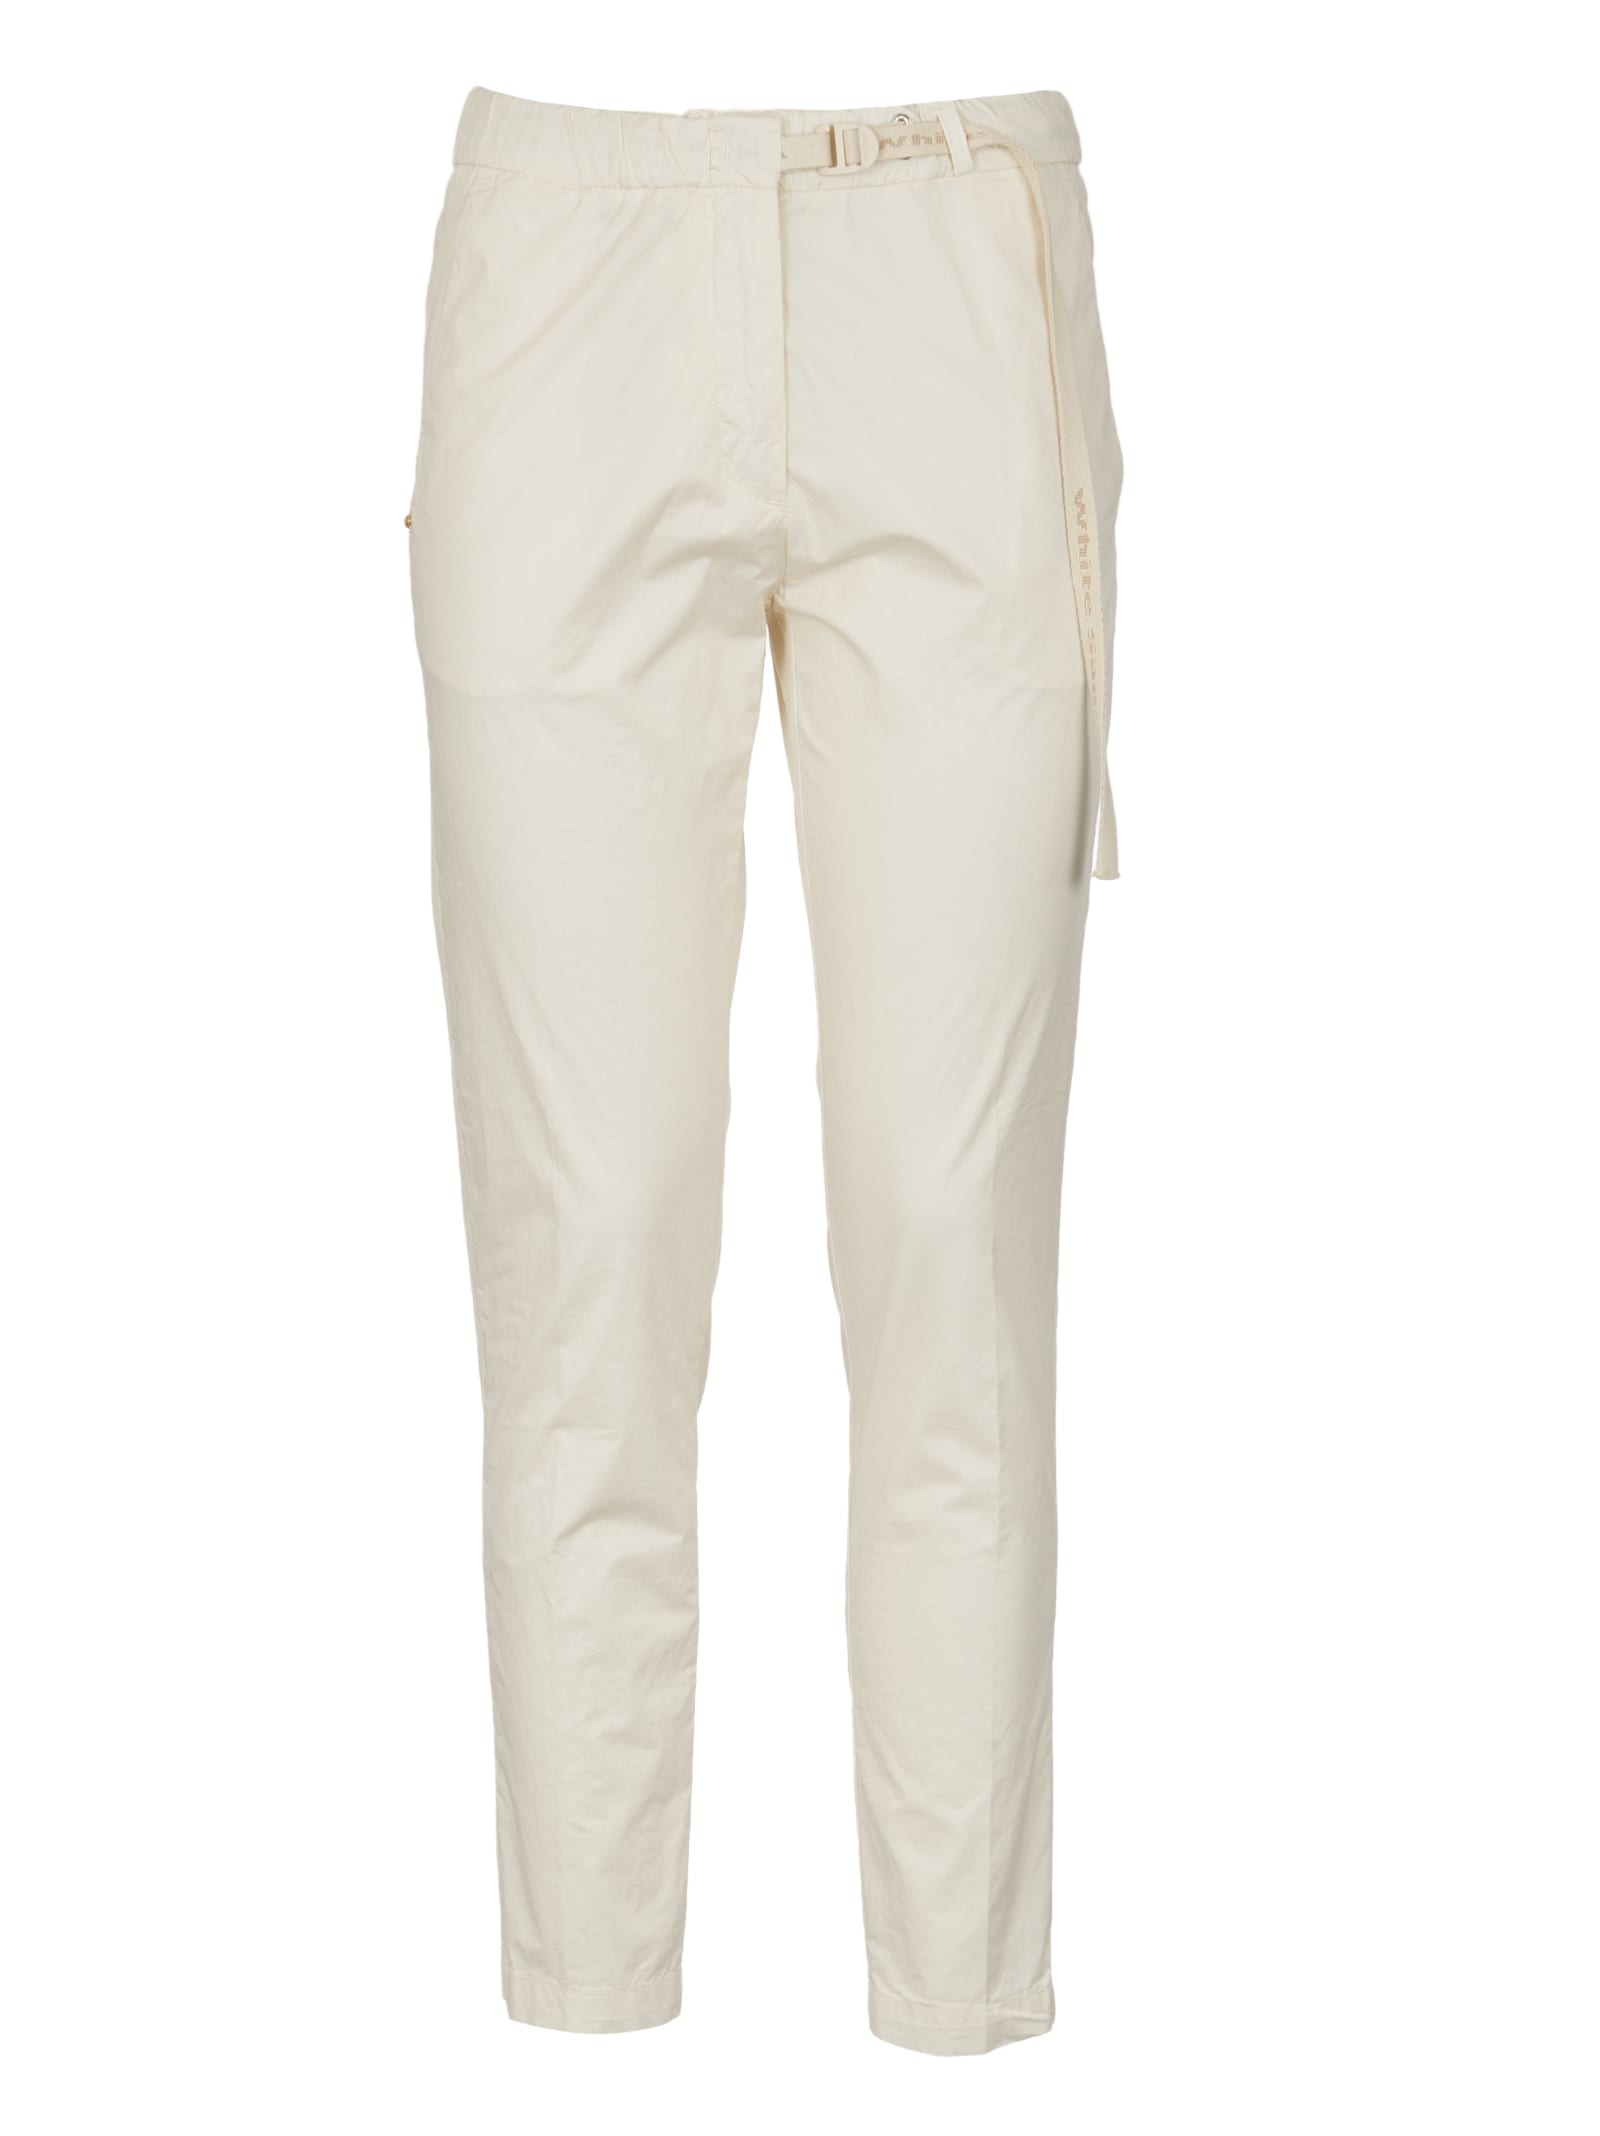 WhiteSand Belted Detail Trousers